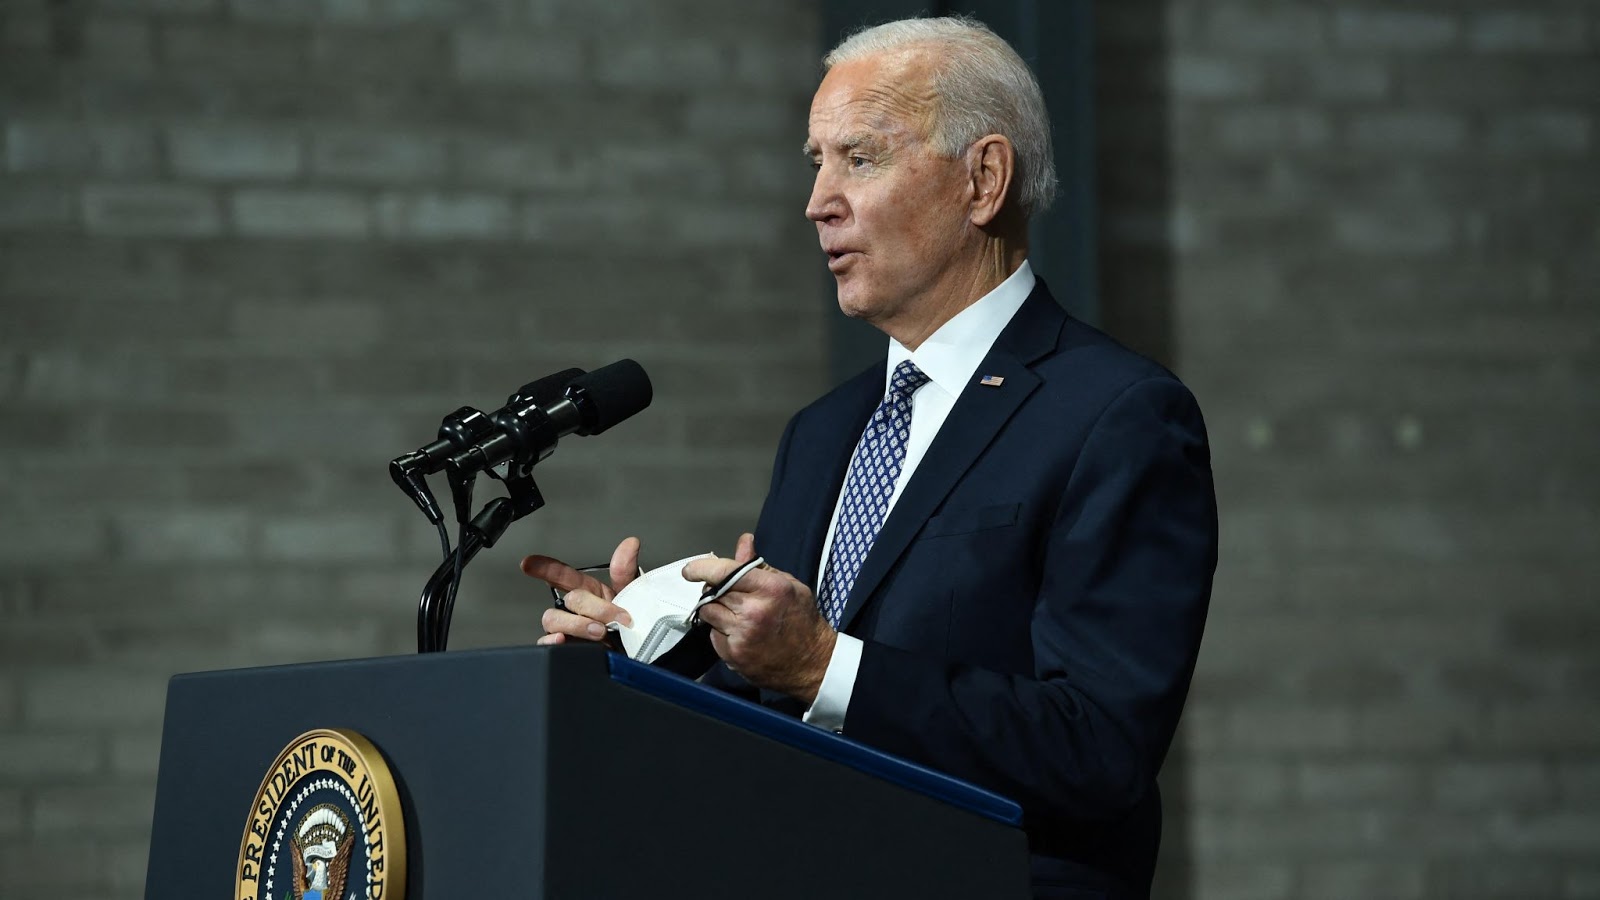 Biden says ‘time to end’ US war in Afghanistan with total pullout